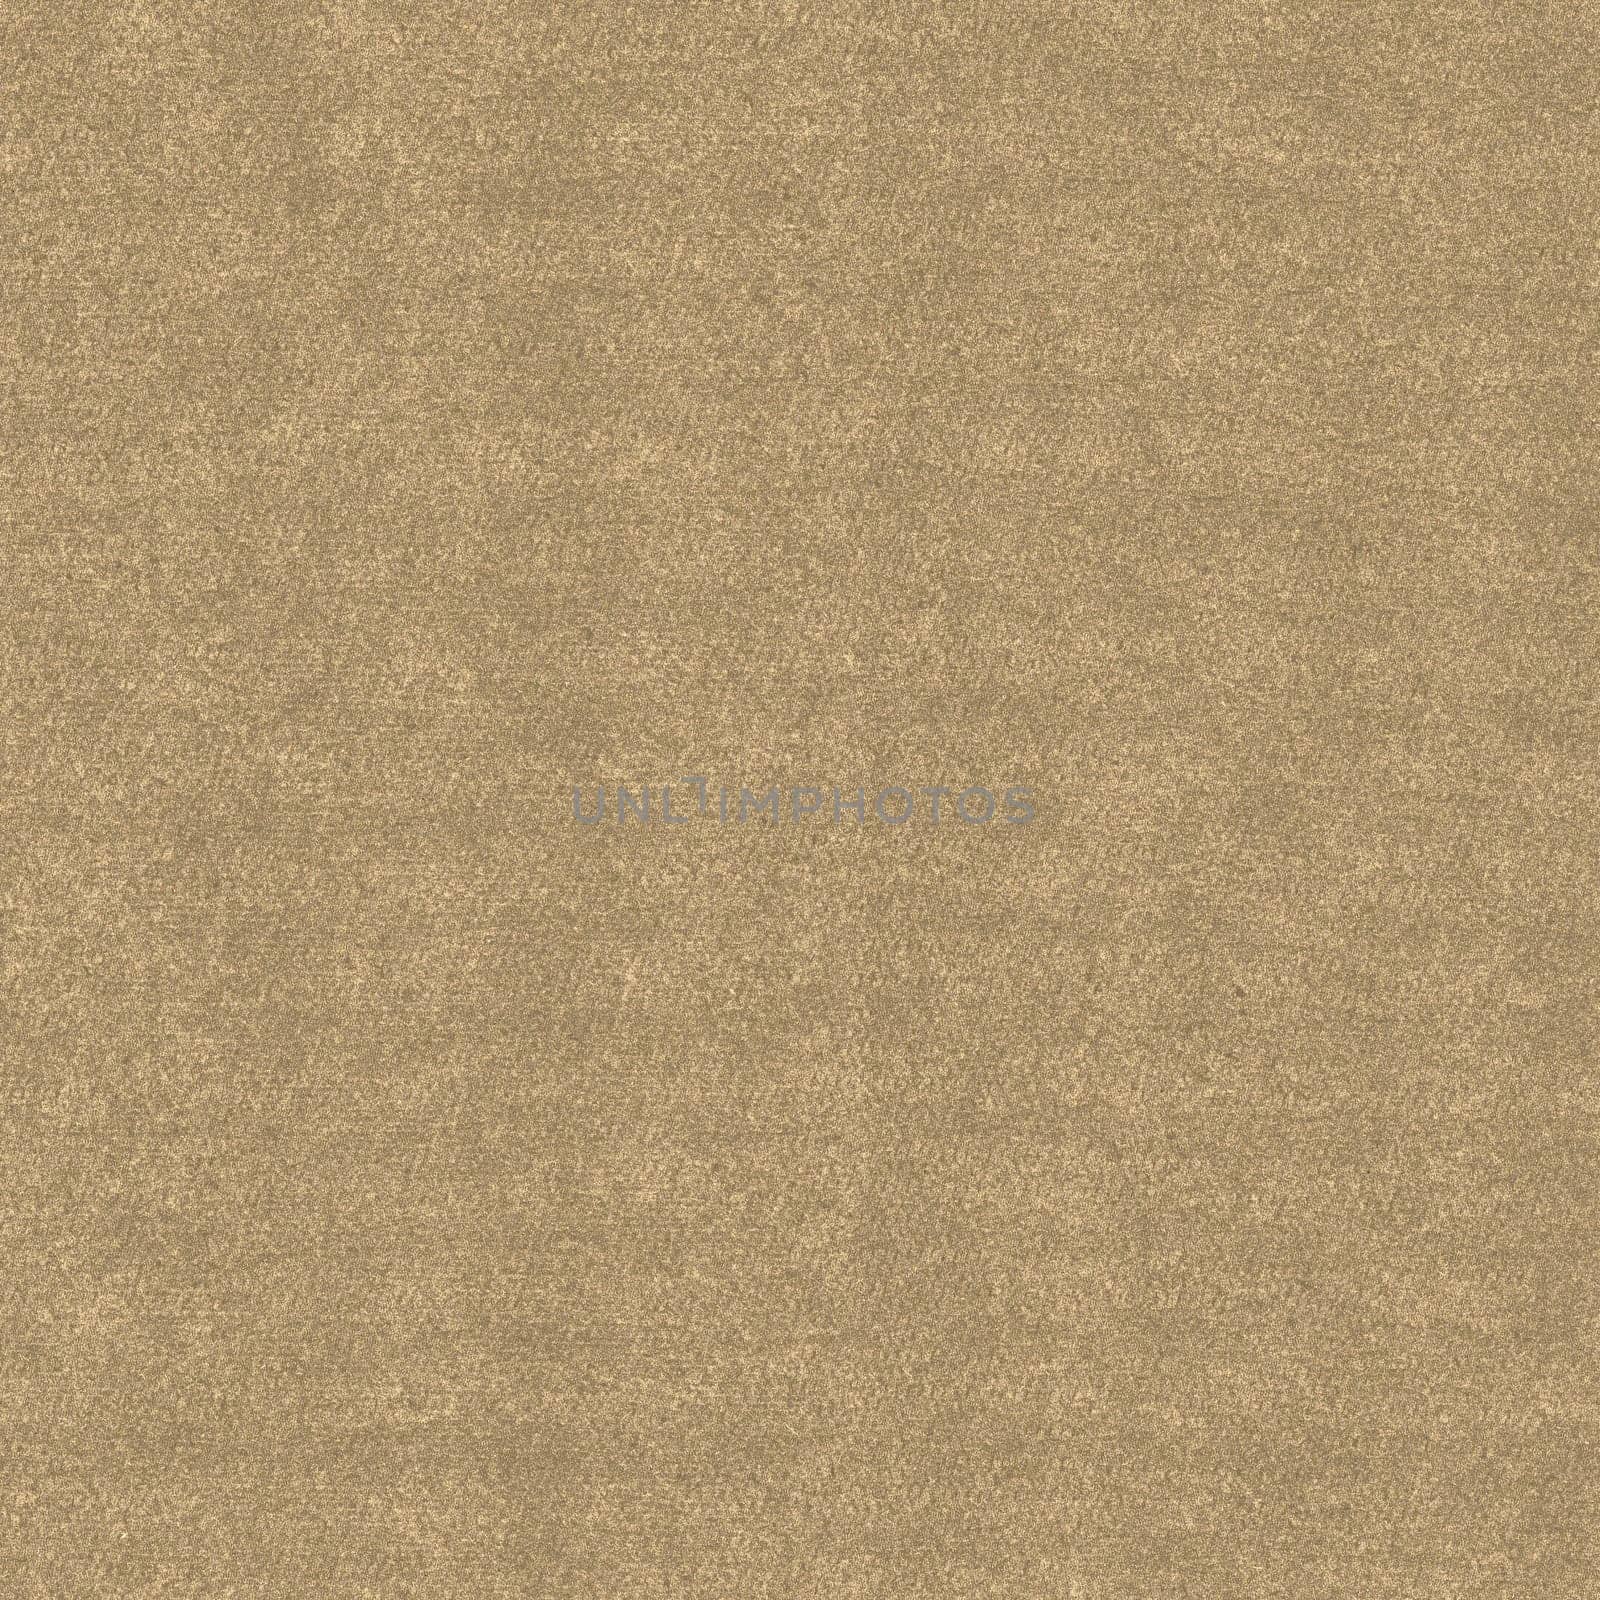 The texture of the background is light brown with a rough and embossed surface by Mastak80